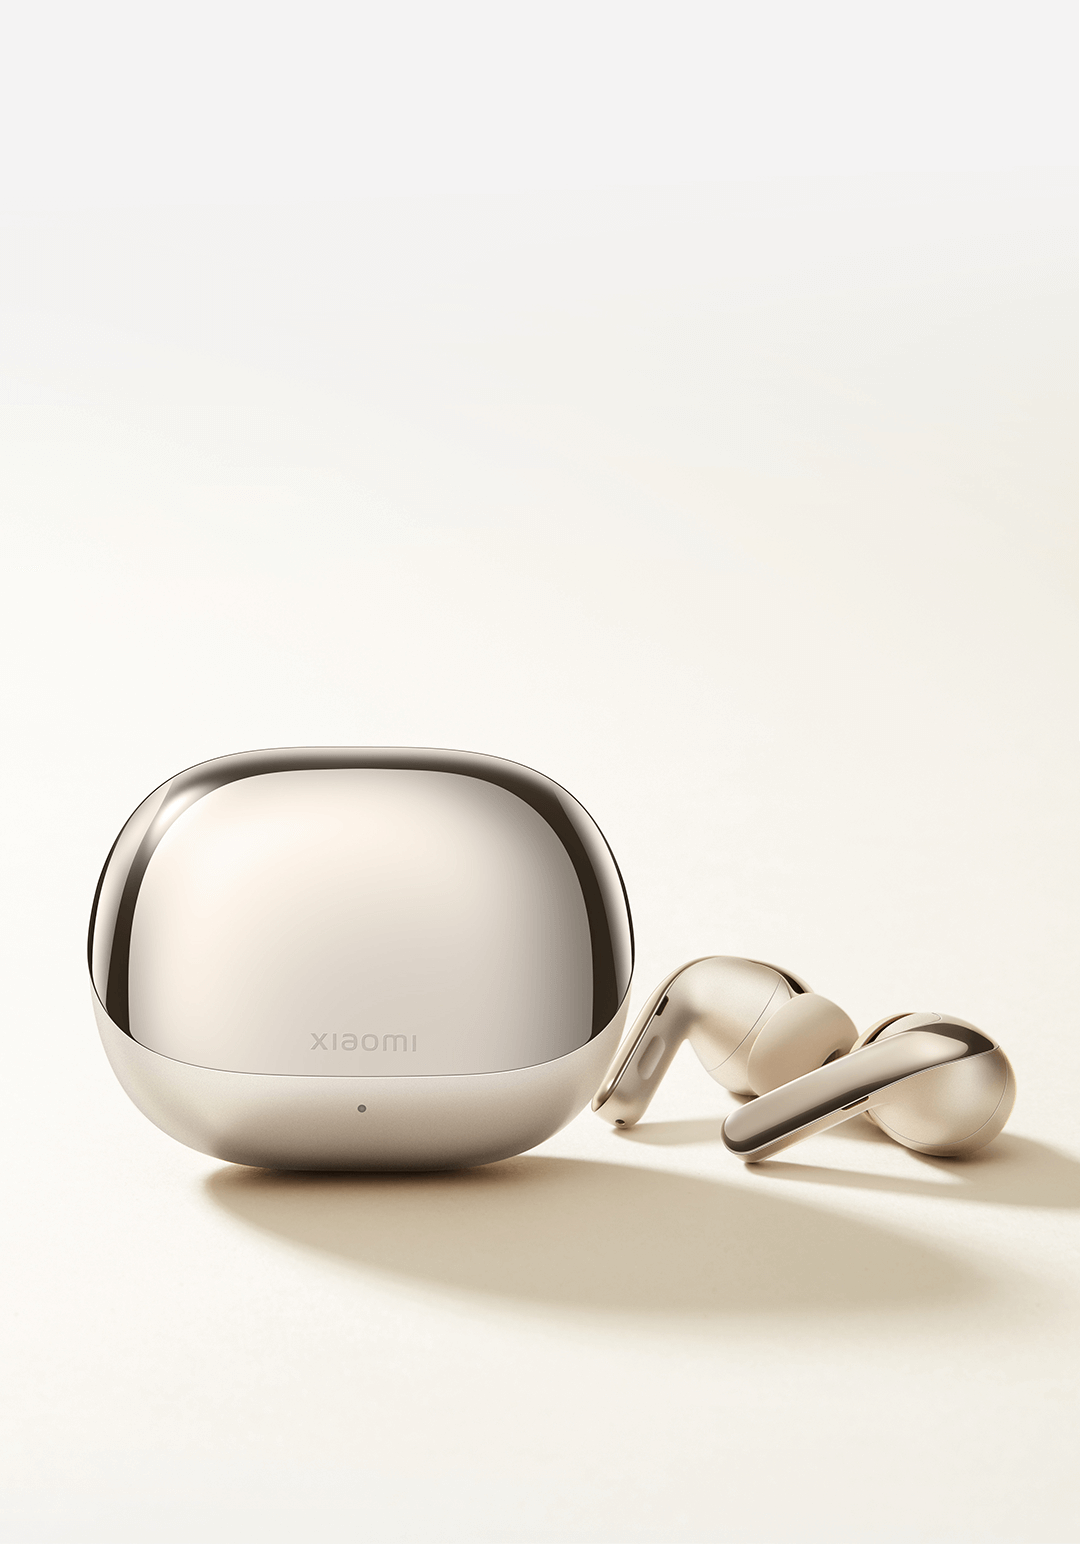 Shiny Xiaomi Buds 4 Pro come inside their own Space Capsule